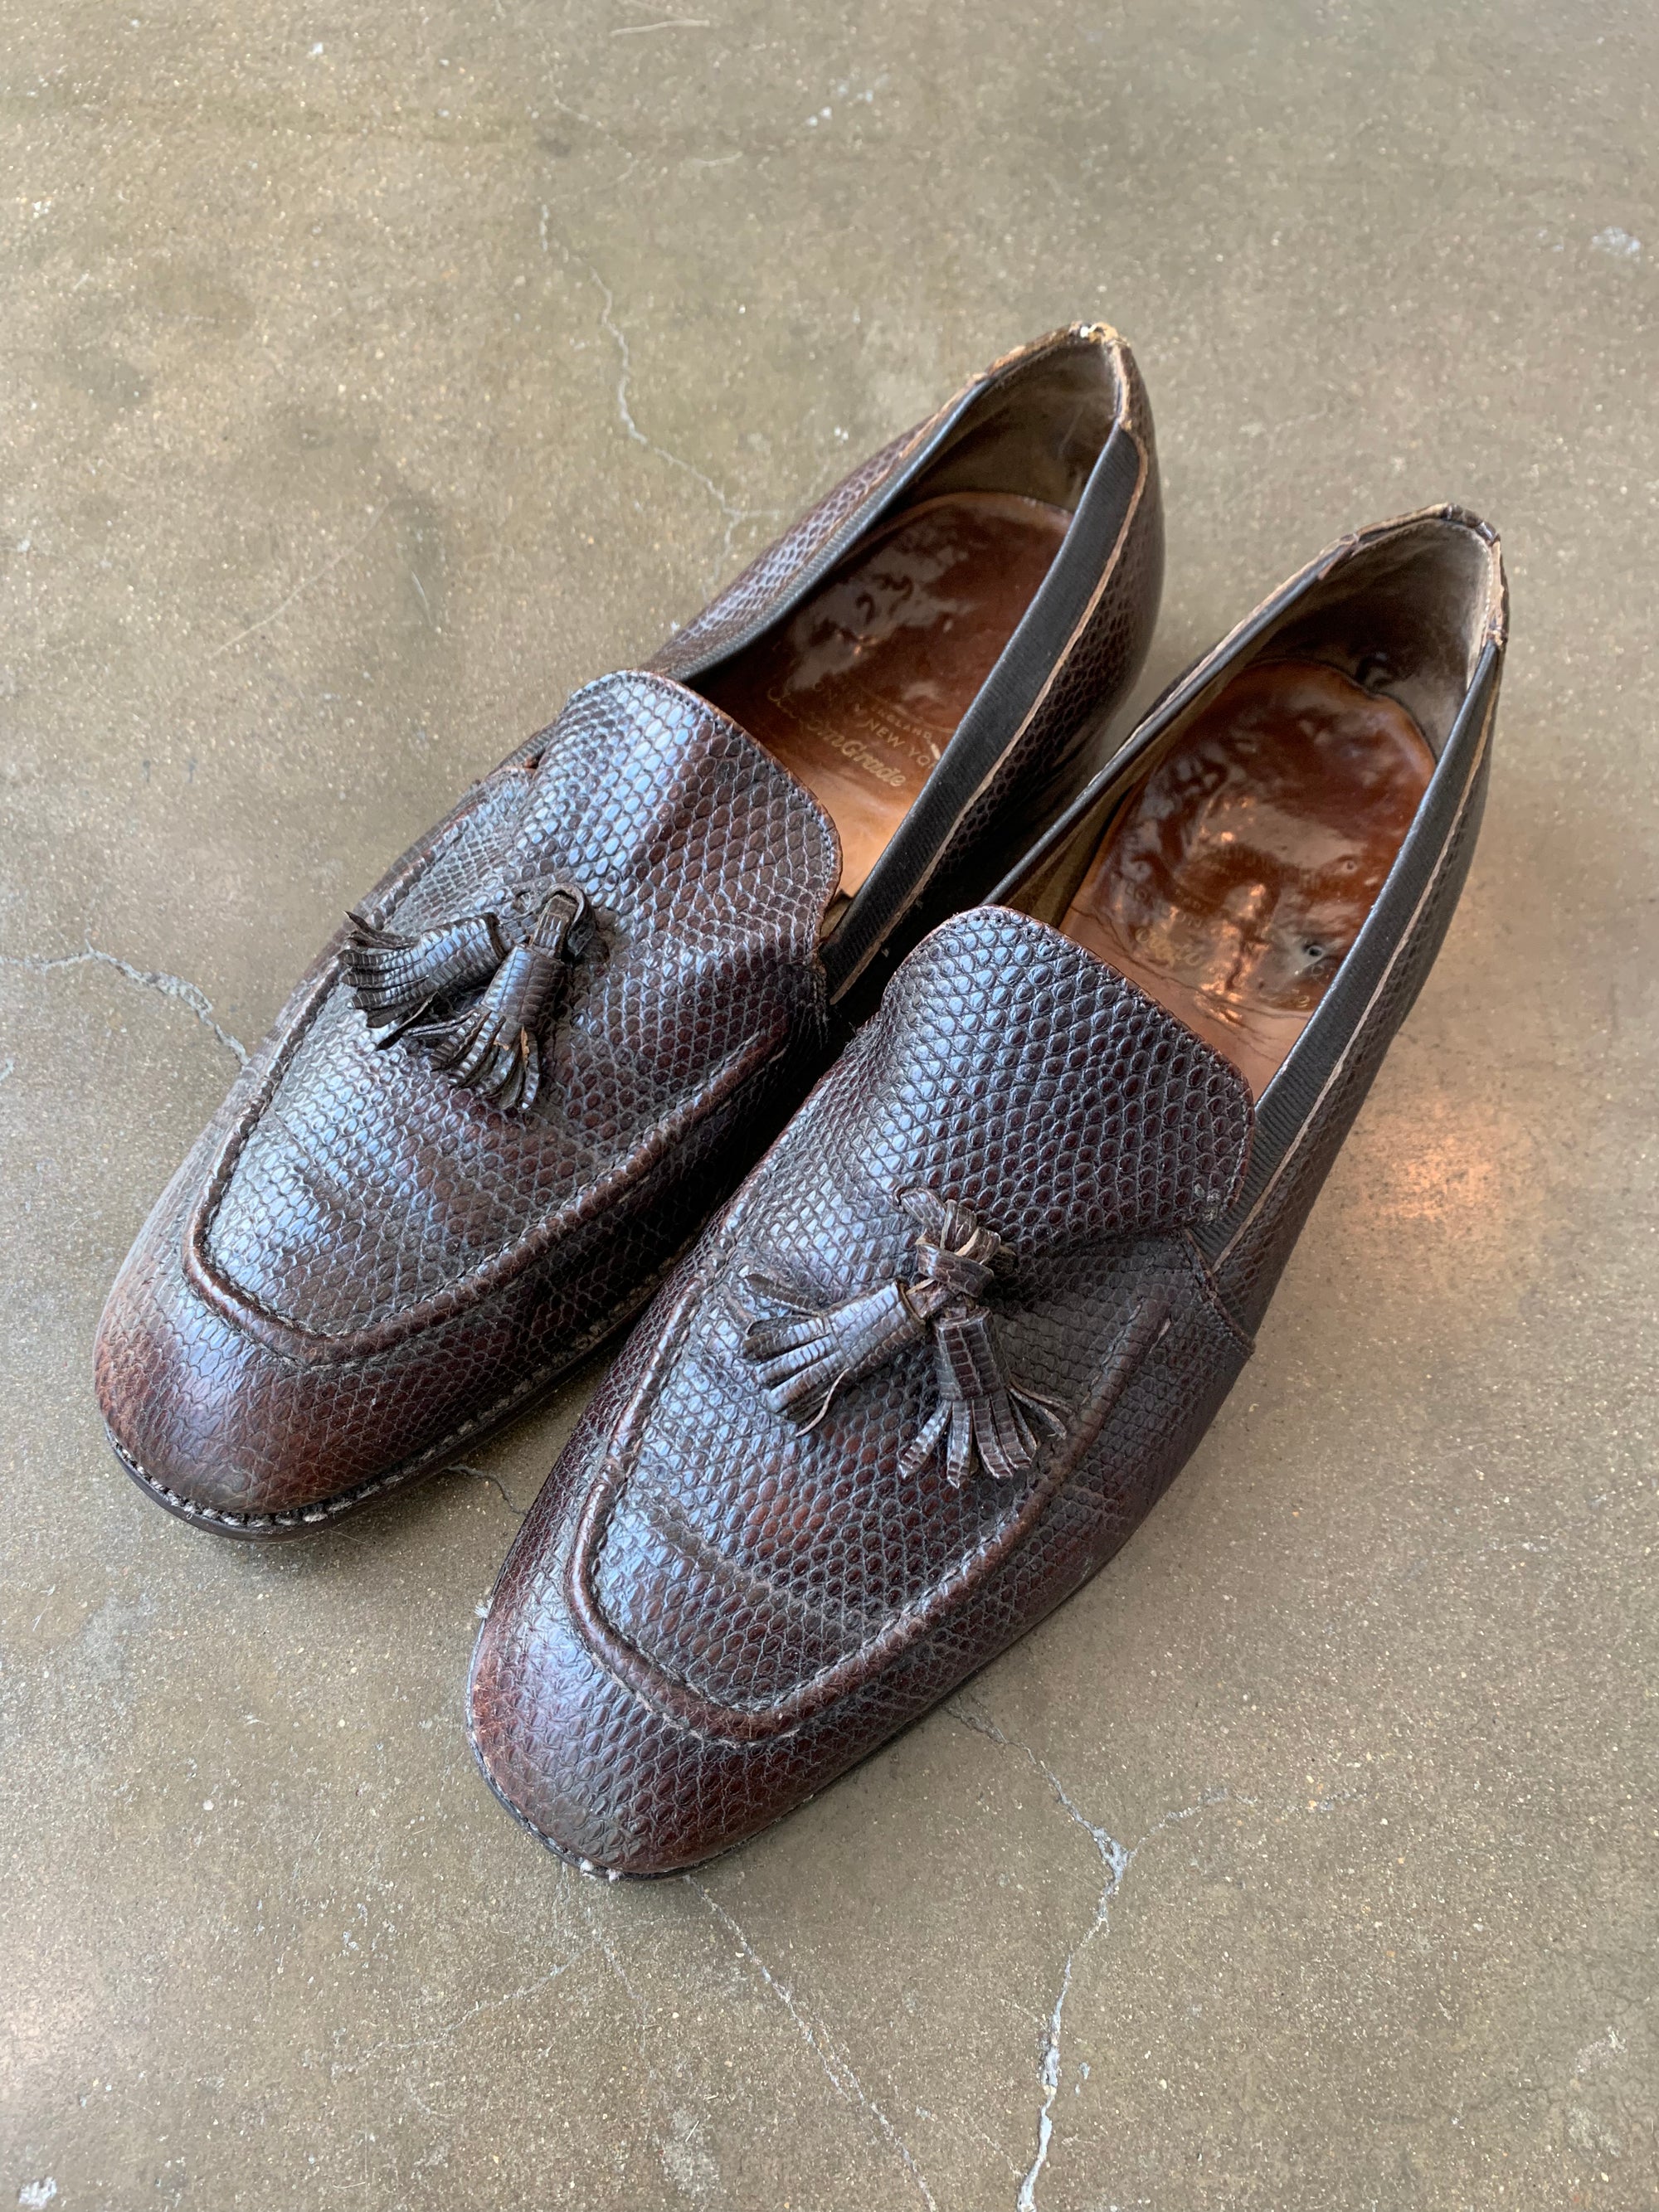 Vintage Men's Woven Loafers